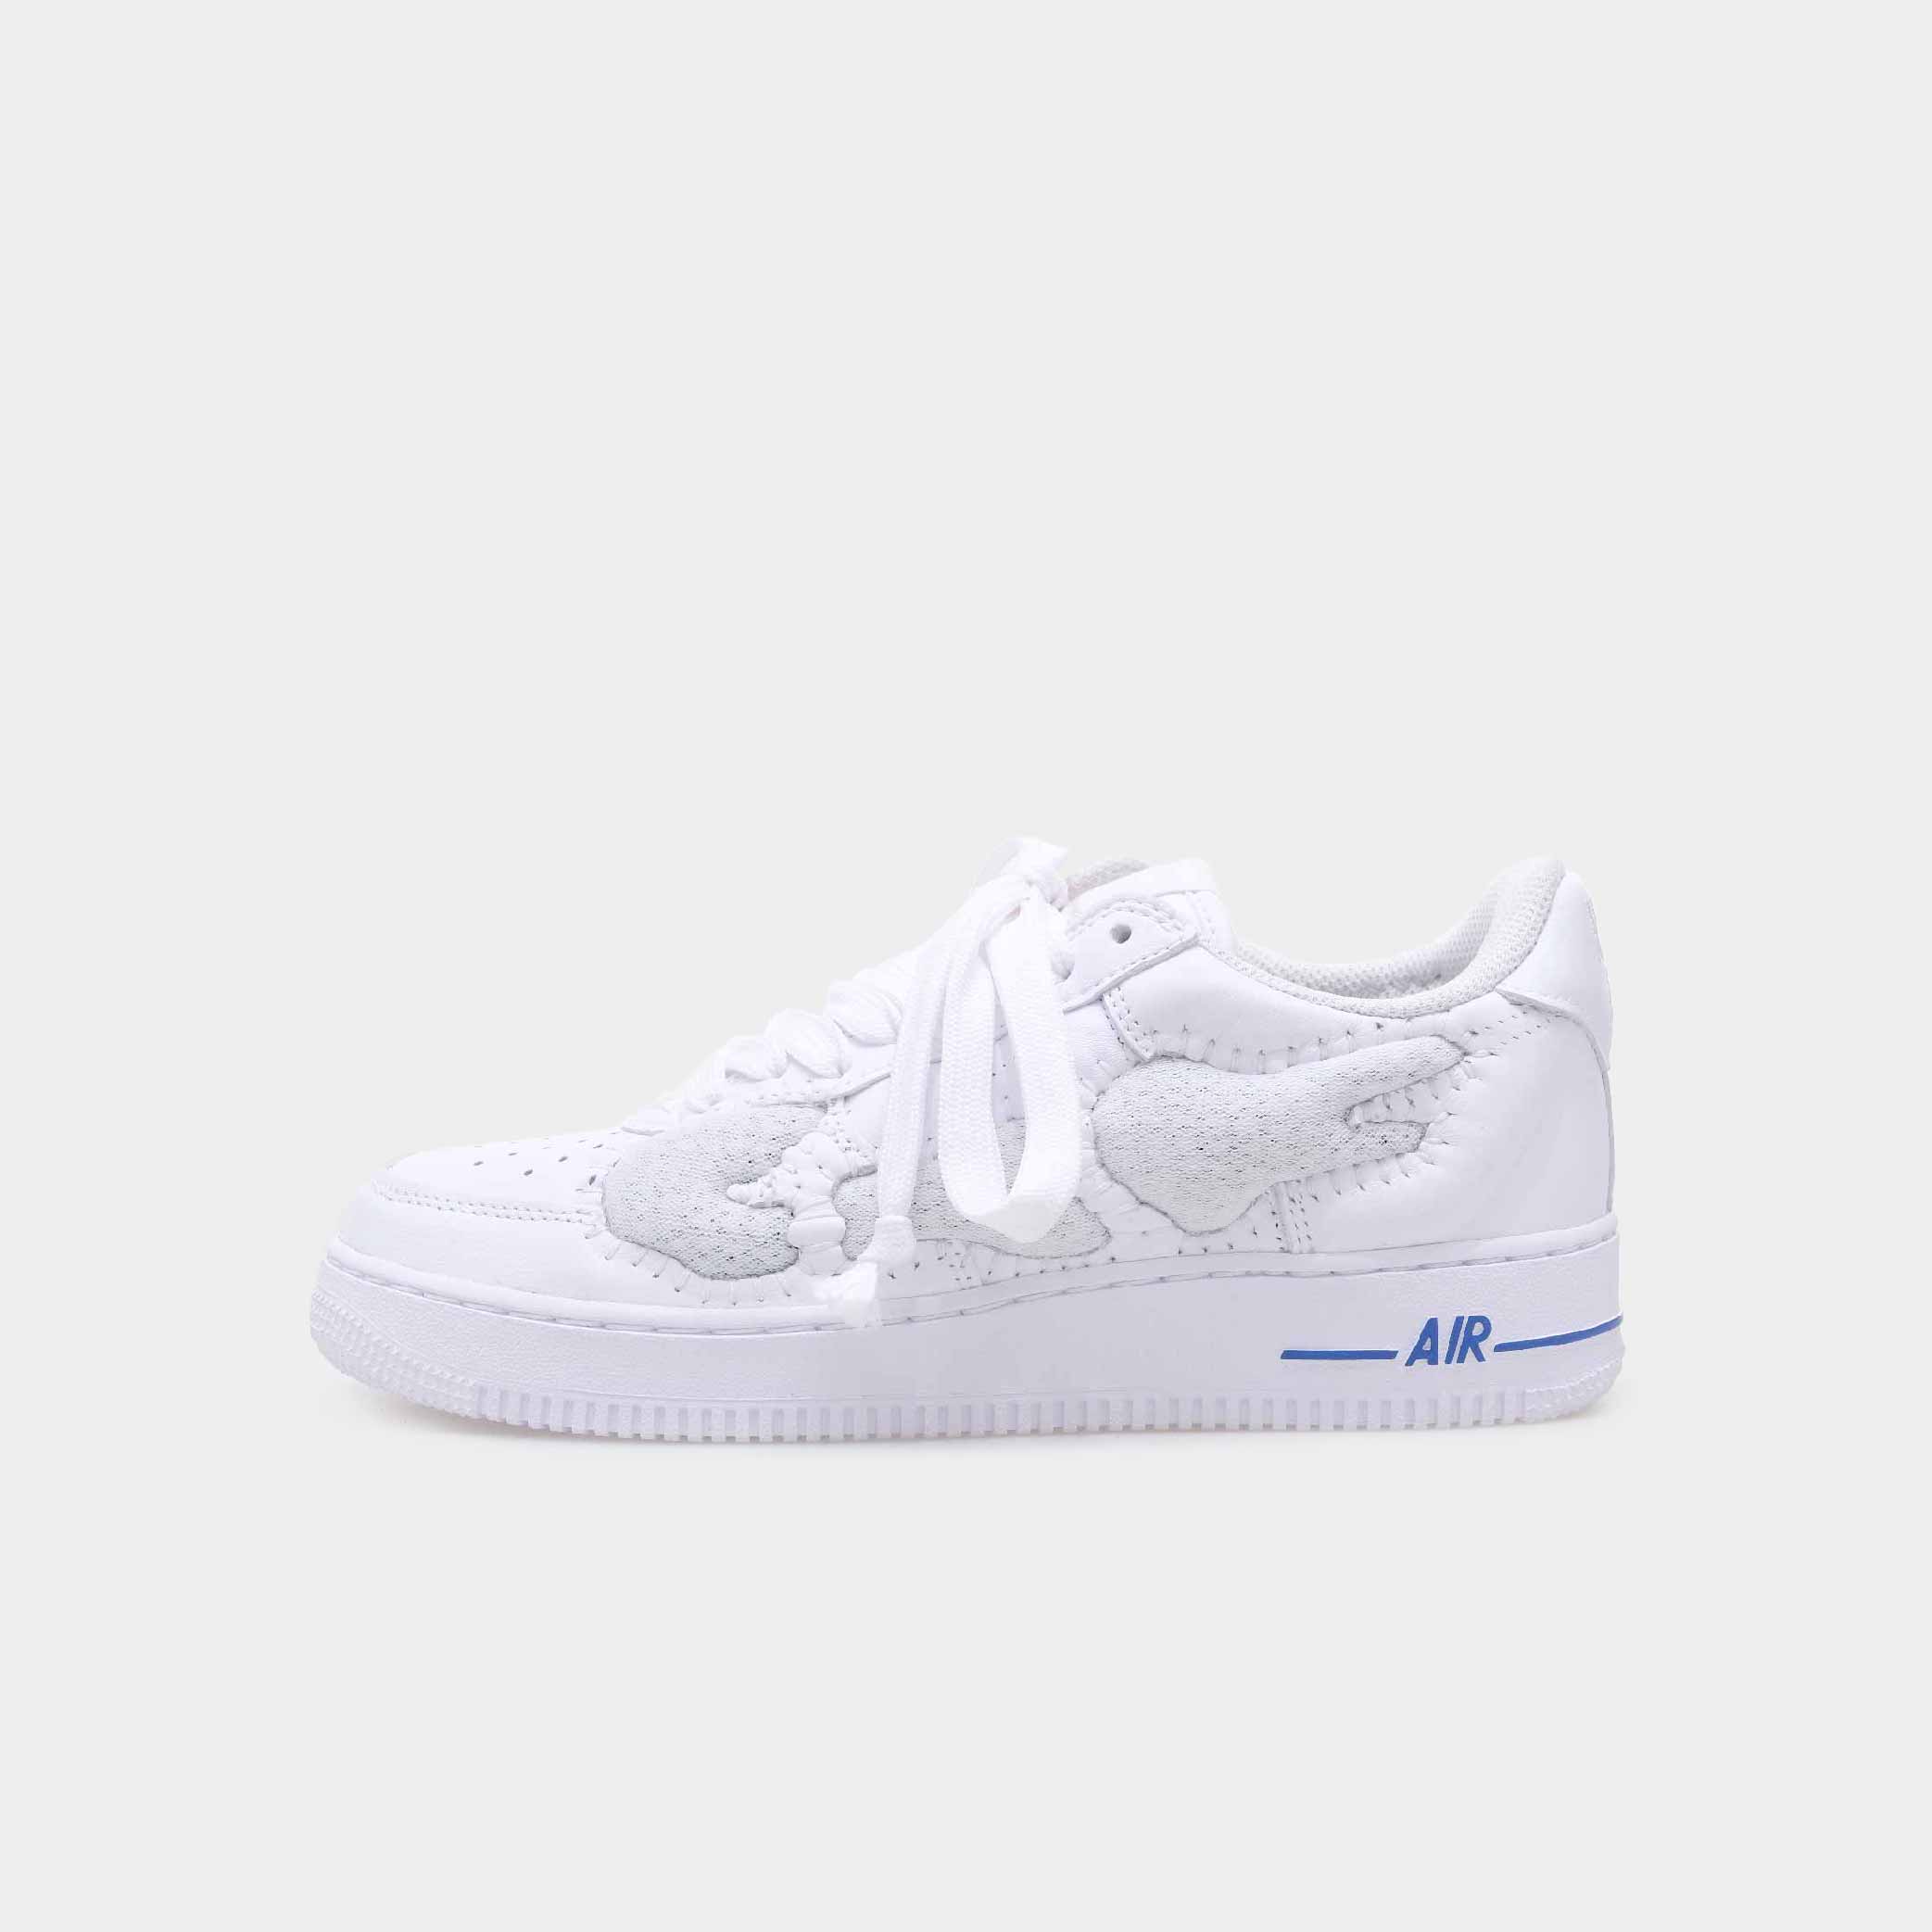 NIKE AIR FORCE 1 40TH ANNIVERSARY | Prominent Japanese Streetwear and ...